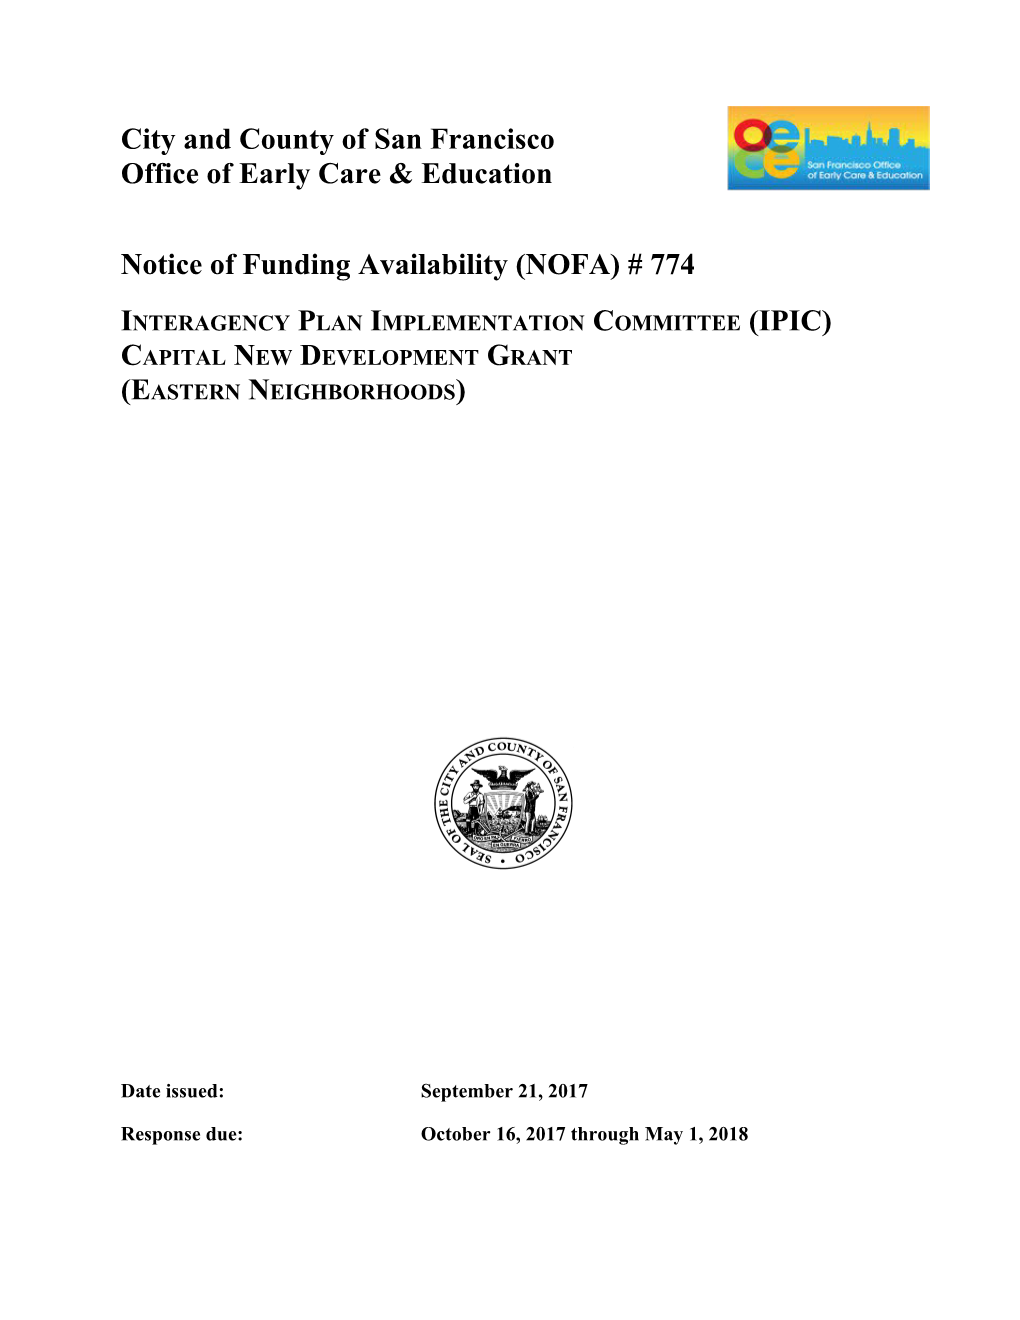 Office of Early Care & Education